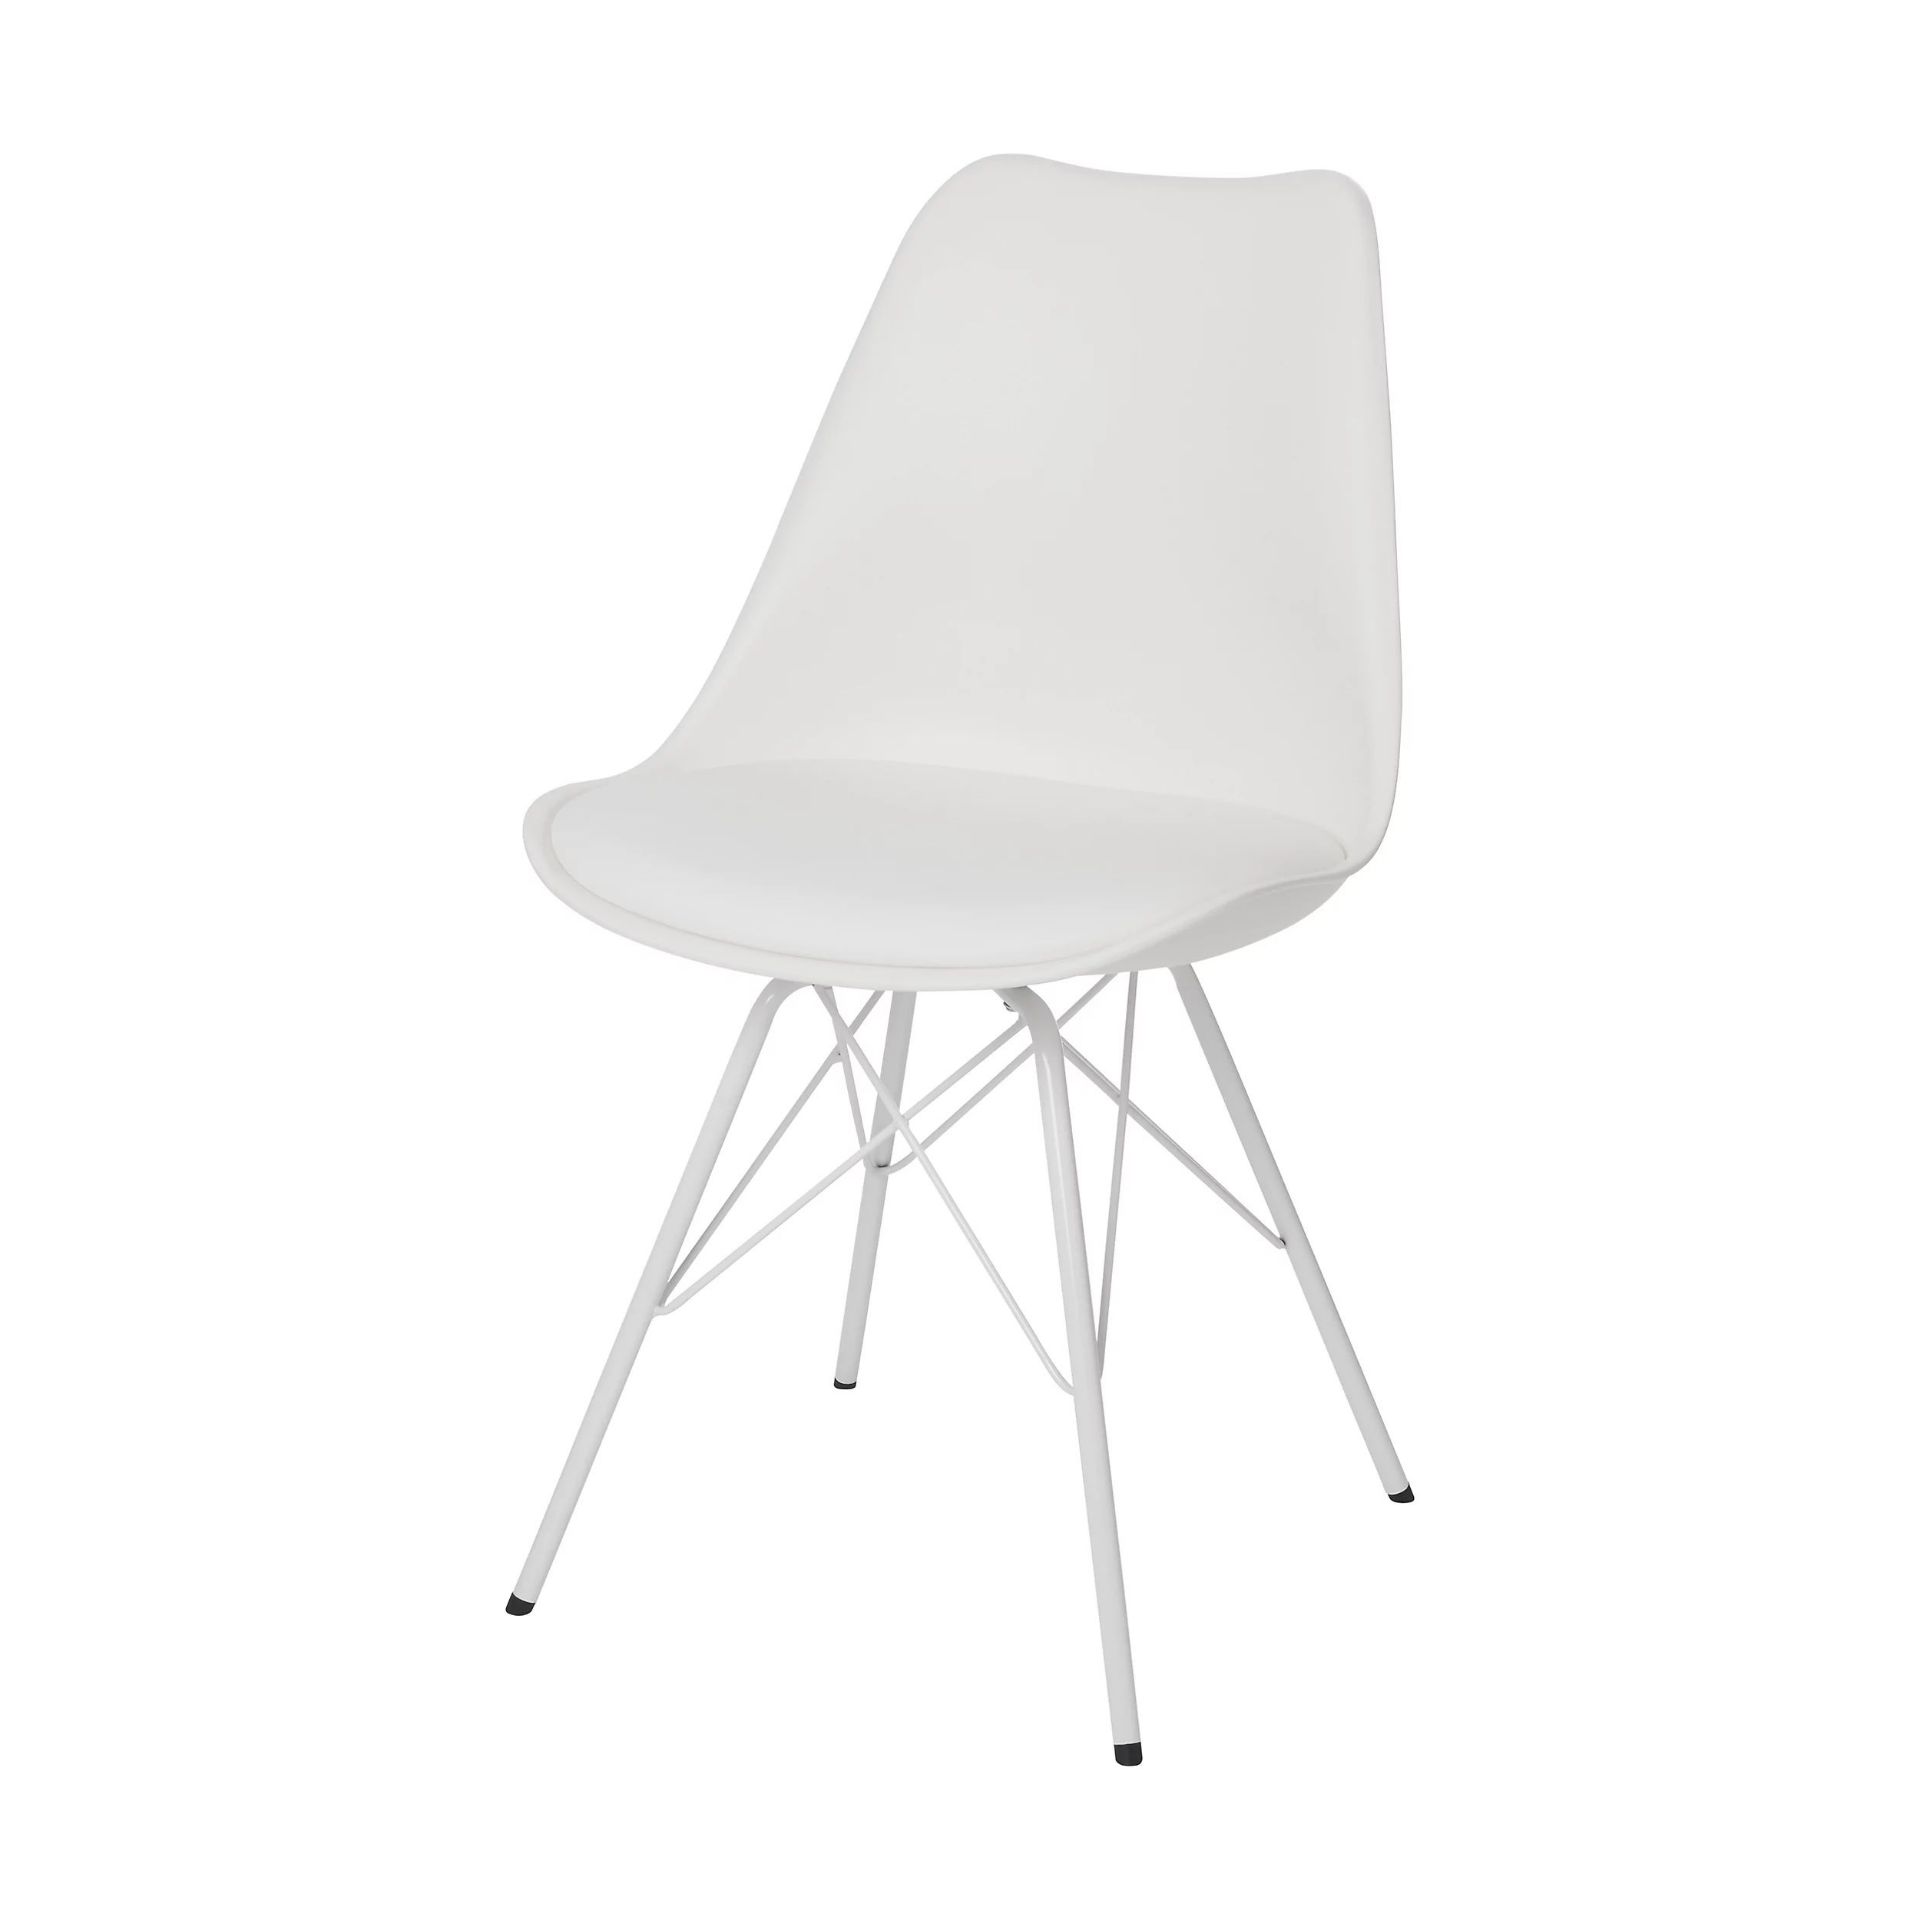 2 X BRAND NEW MARULA WHITE FIXED LEG DINING CHAIRS R10-8